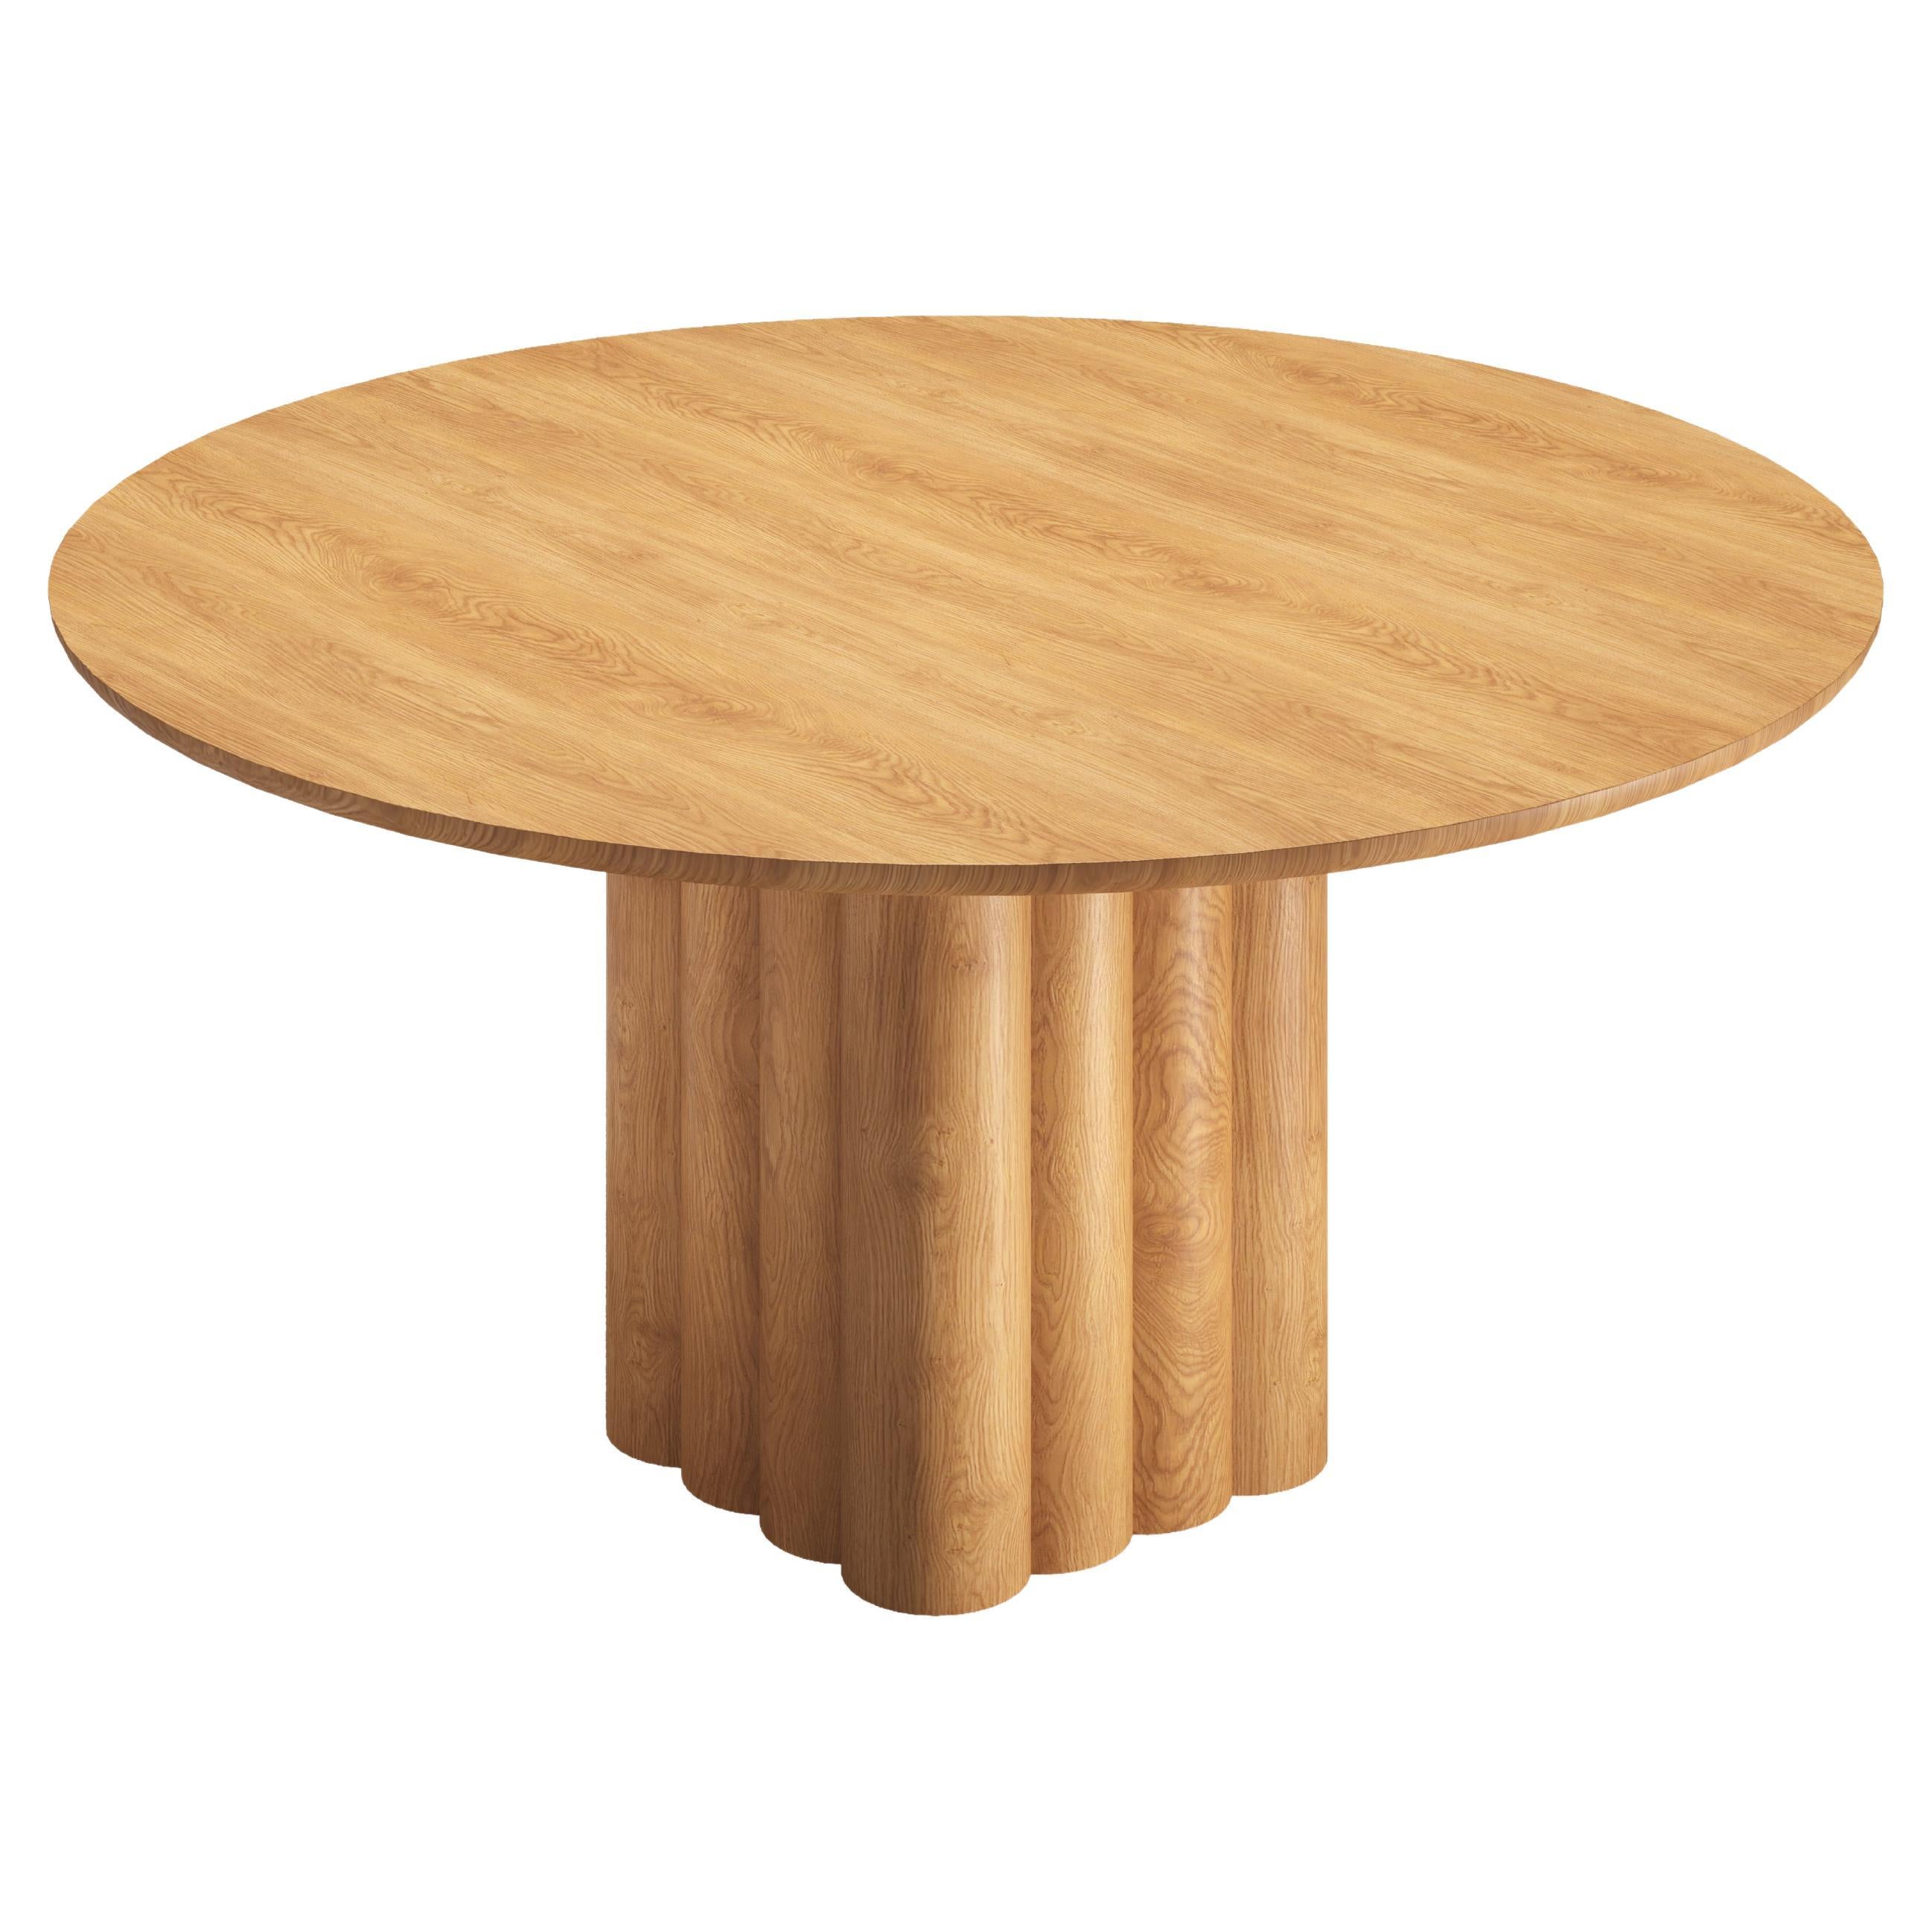 Round Dining Table 'Plush' by Dk3, Natural Oak, 150 cm